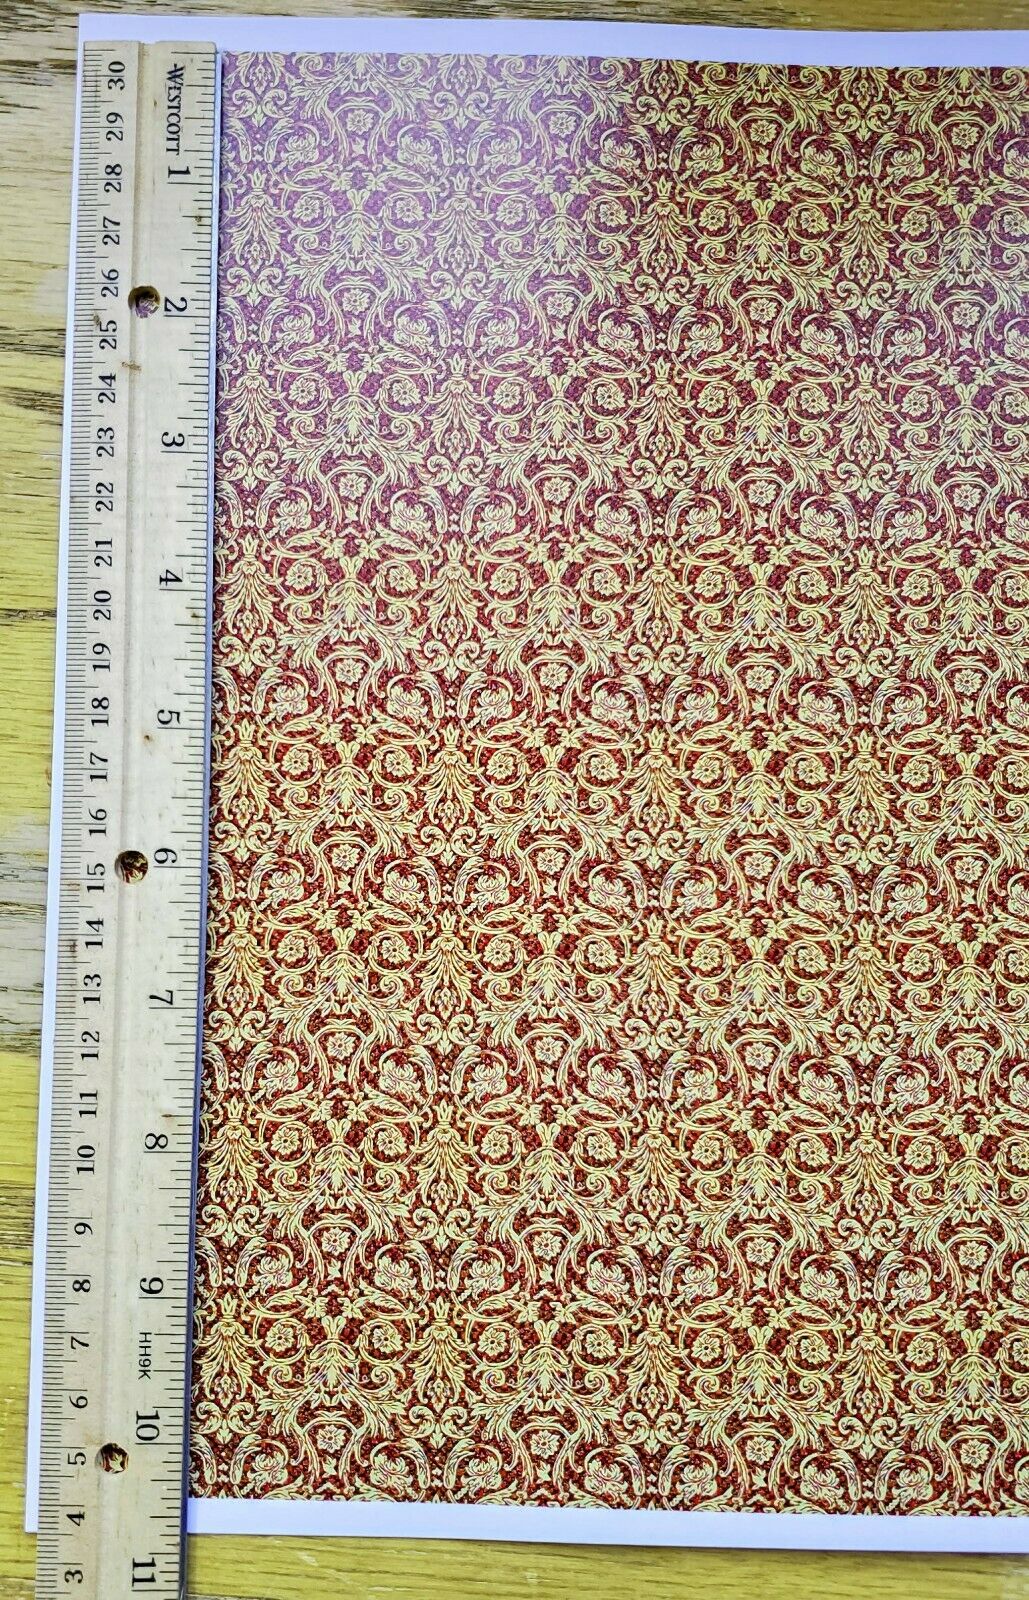 Dollhouse Wallpaper Gold on Red Festive Damask 1:12 Scale Itsy Bitsy - Miniature Crush